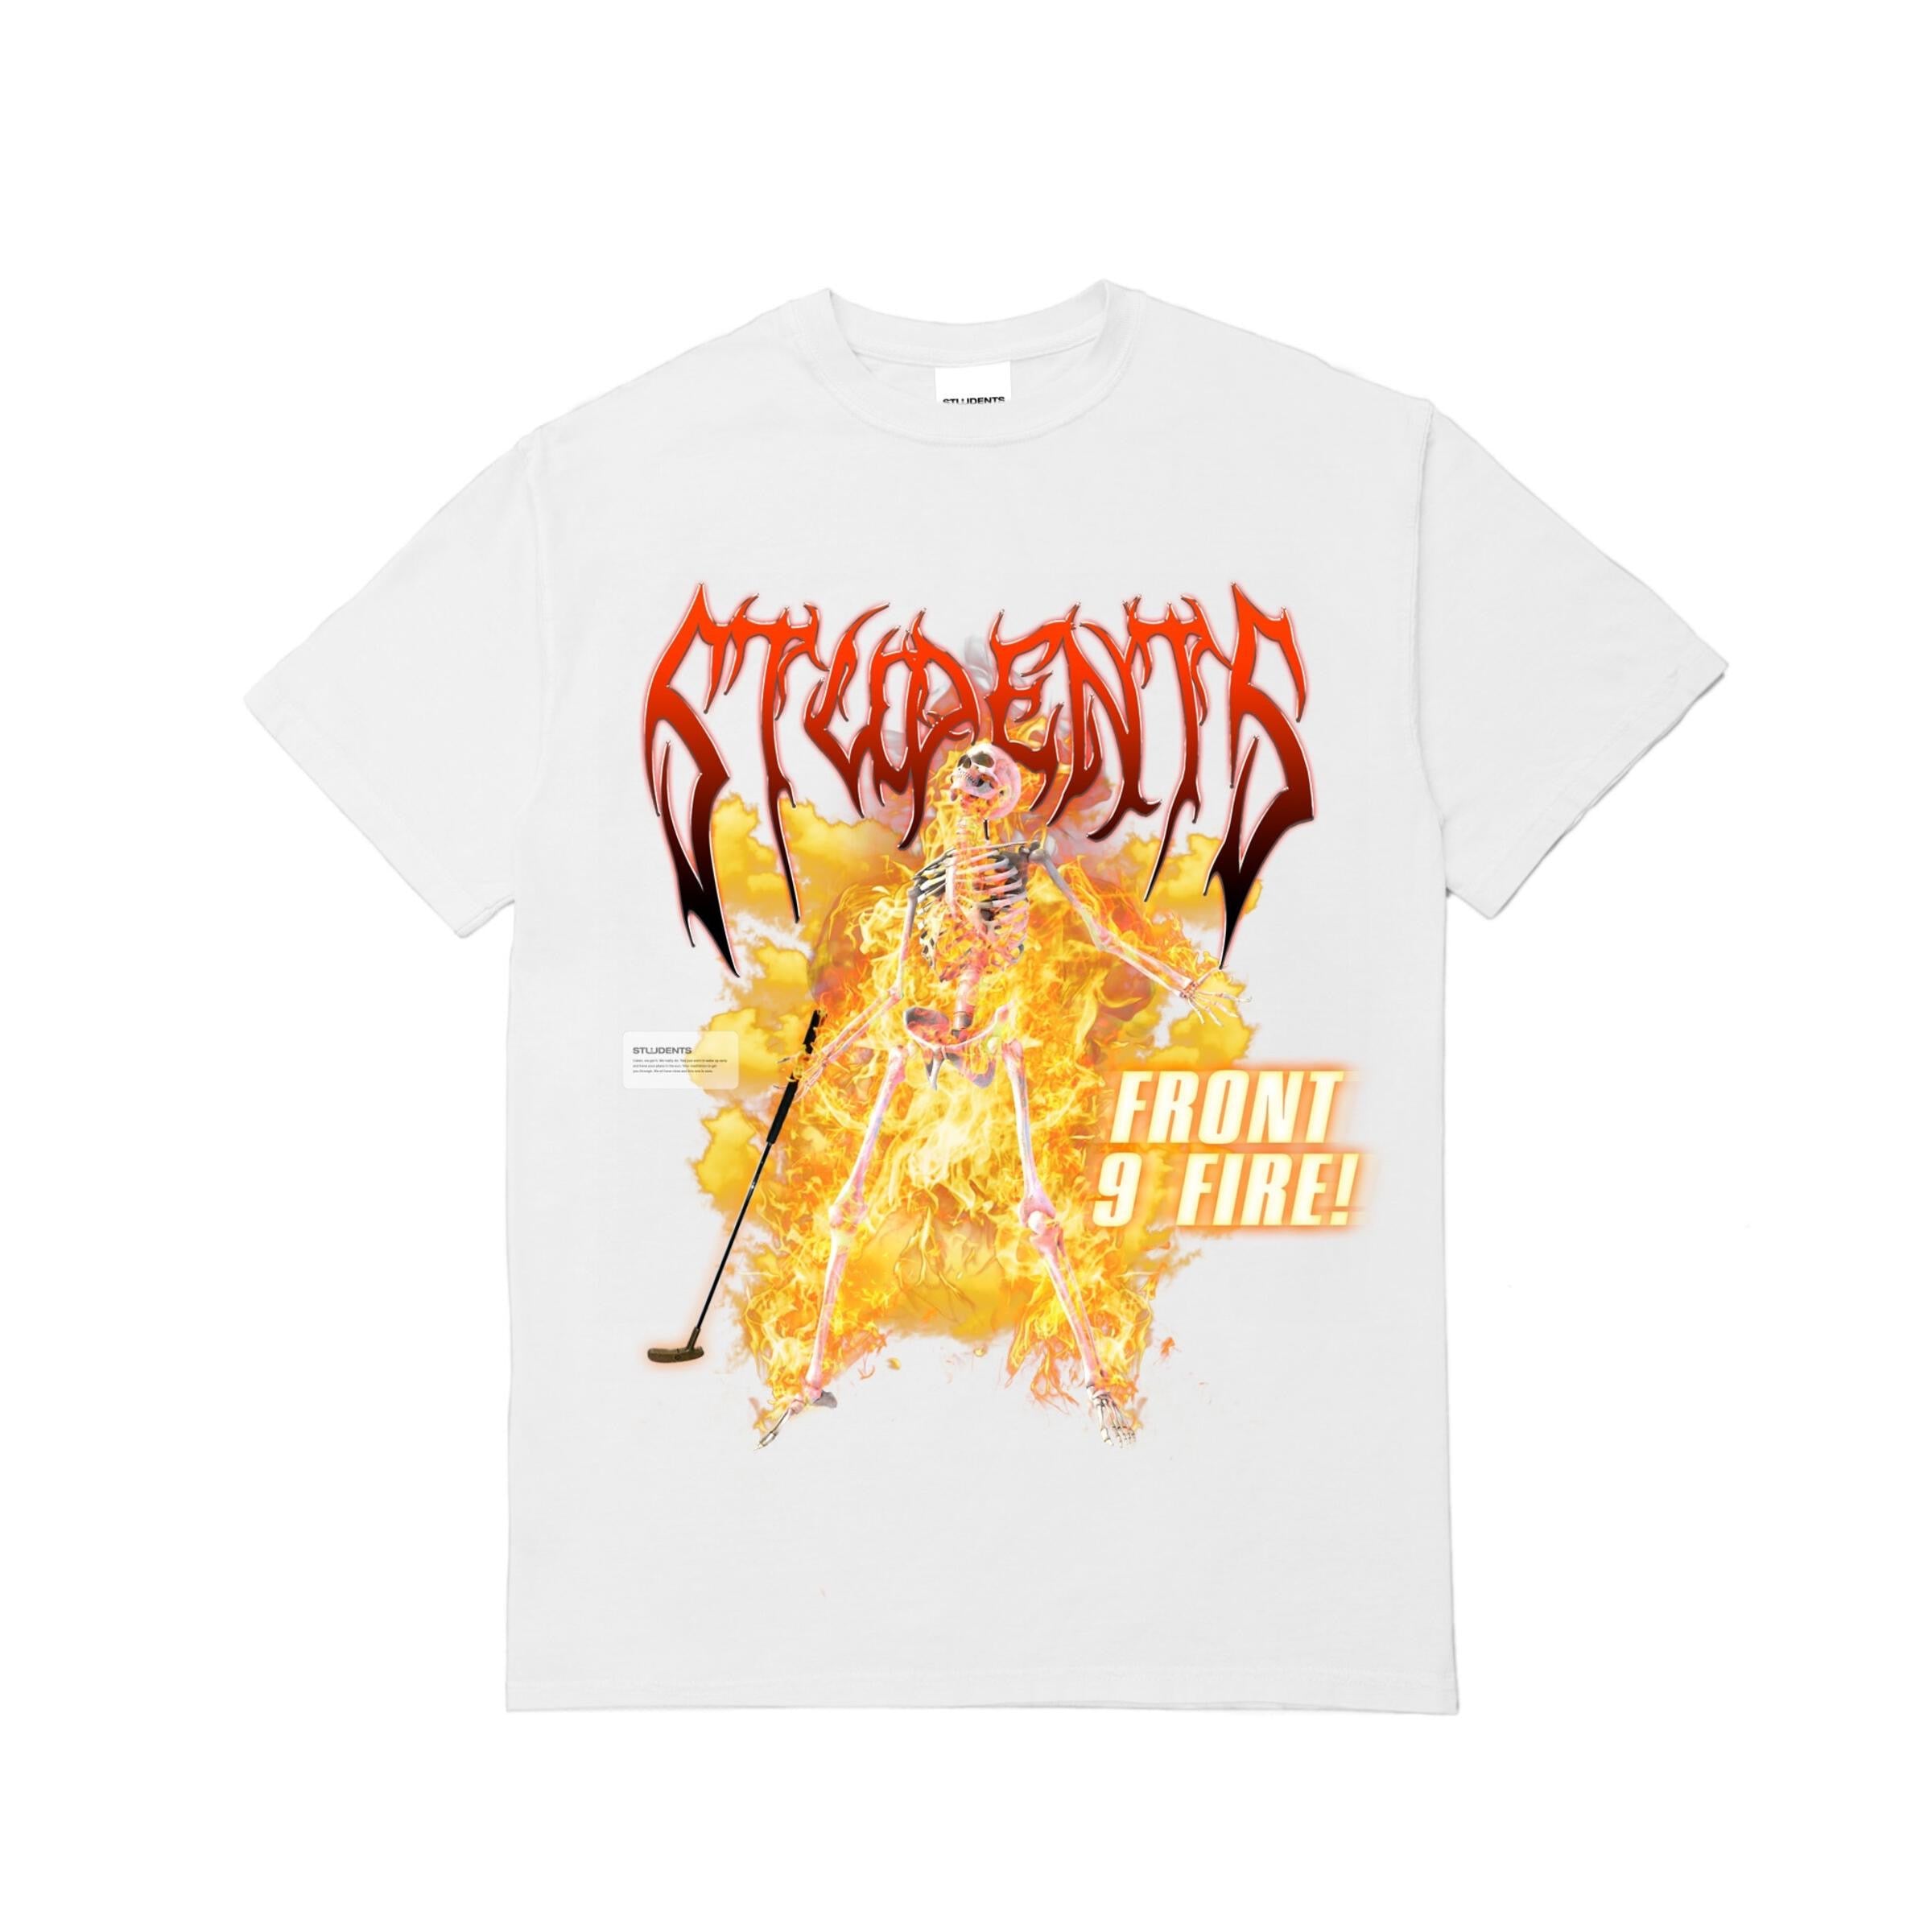 Students Front 9 Fire T-shirt - White